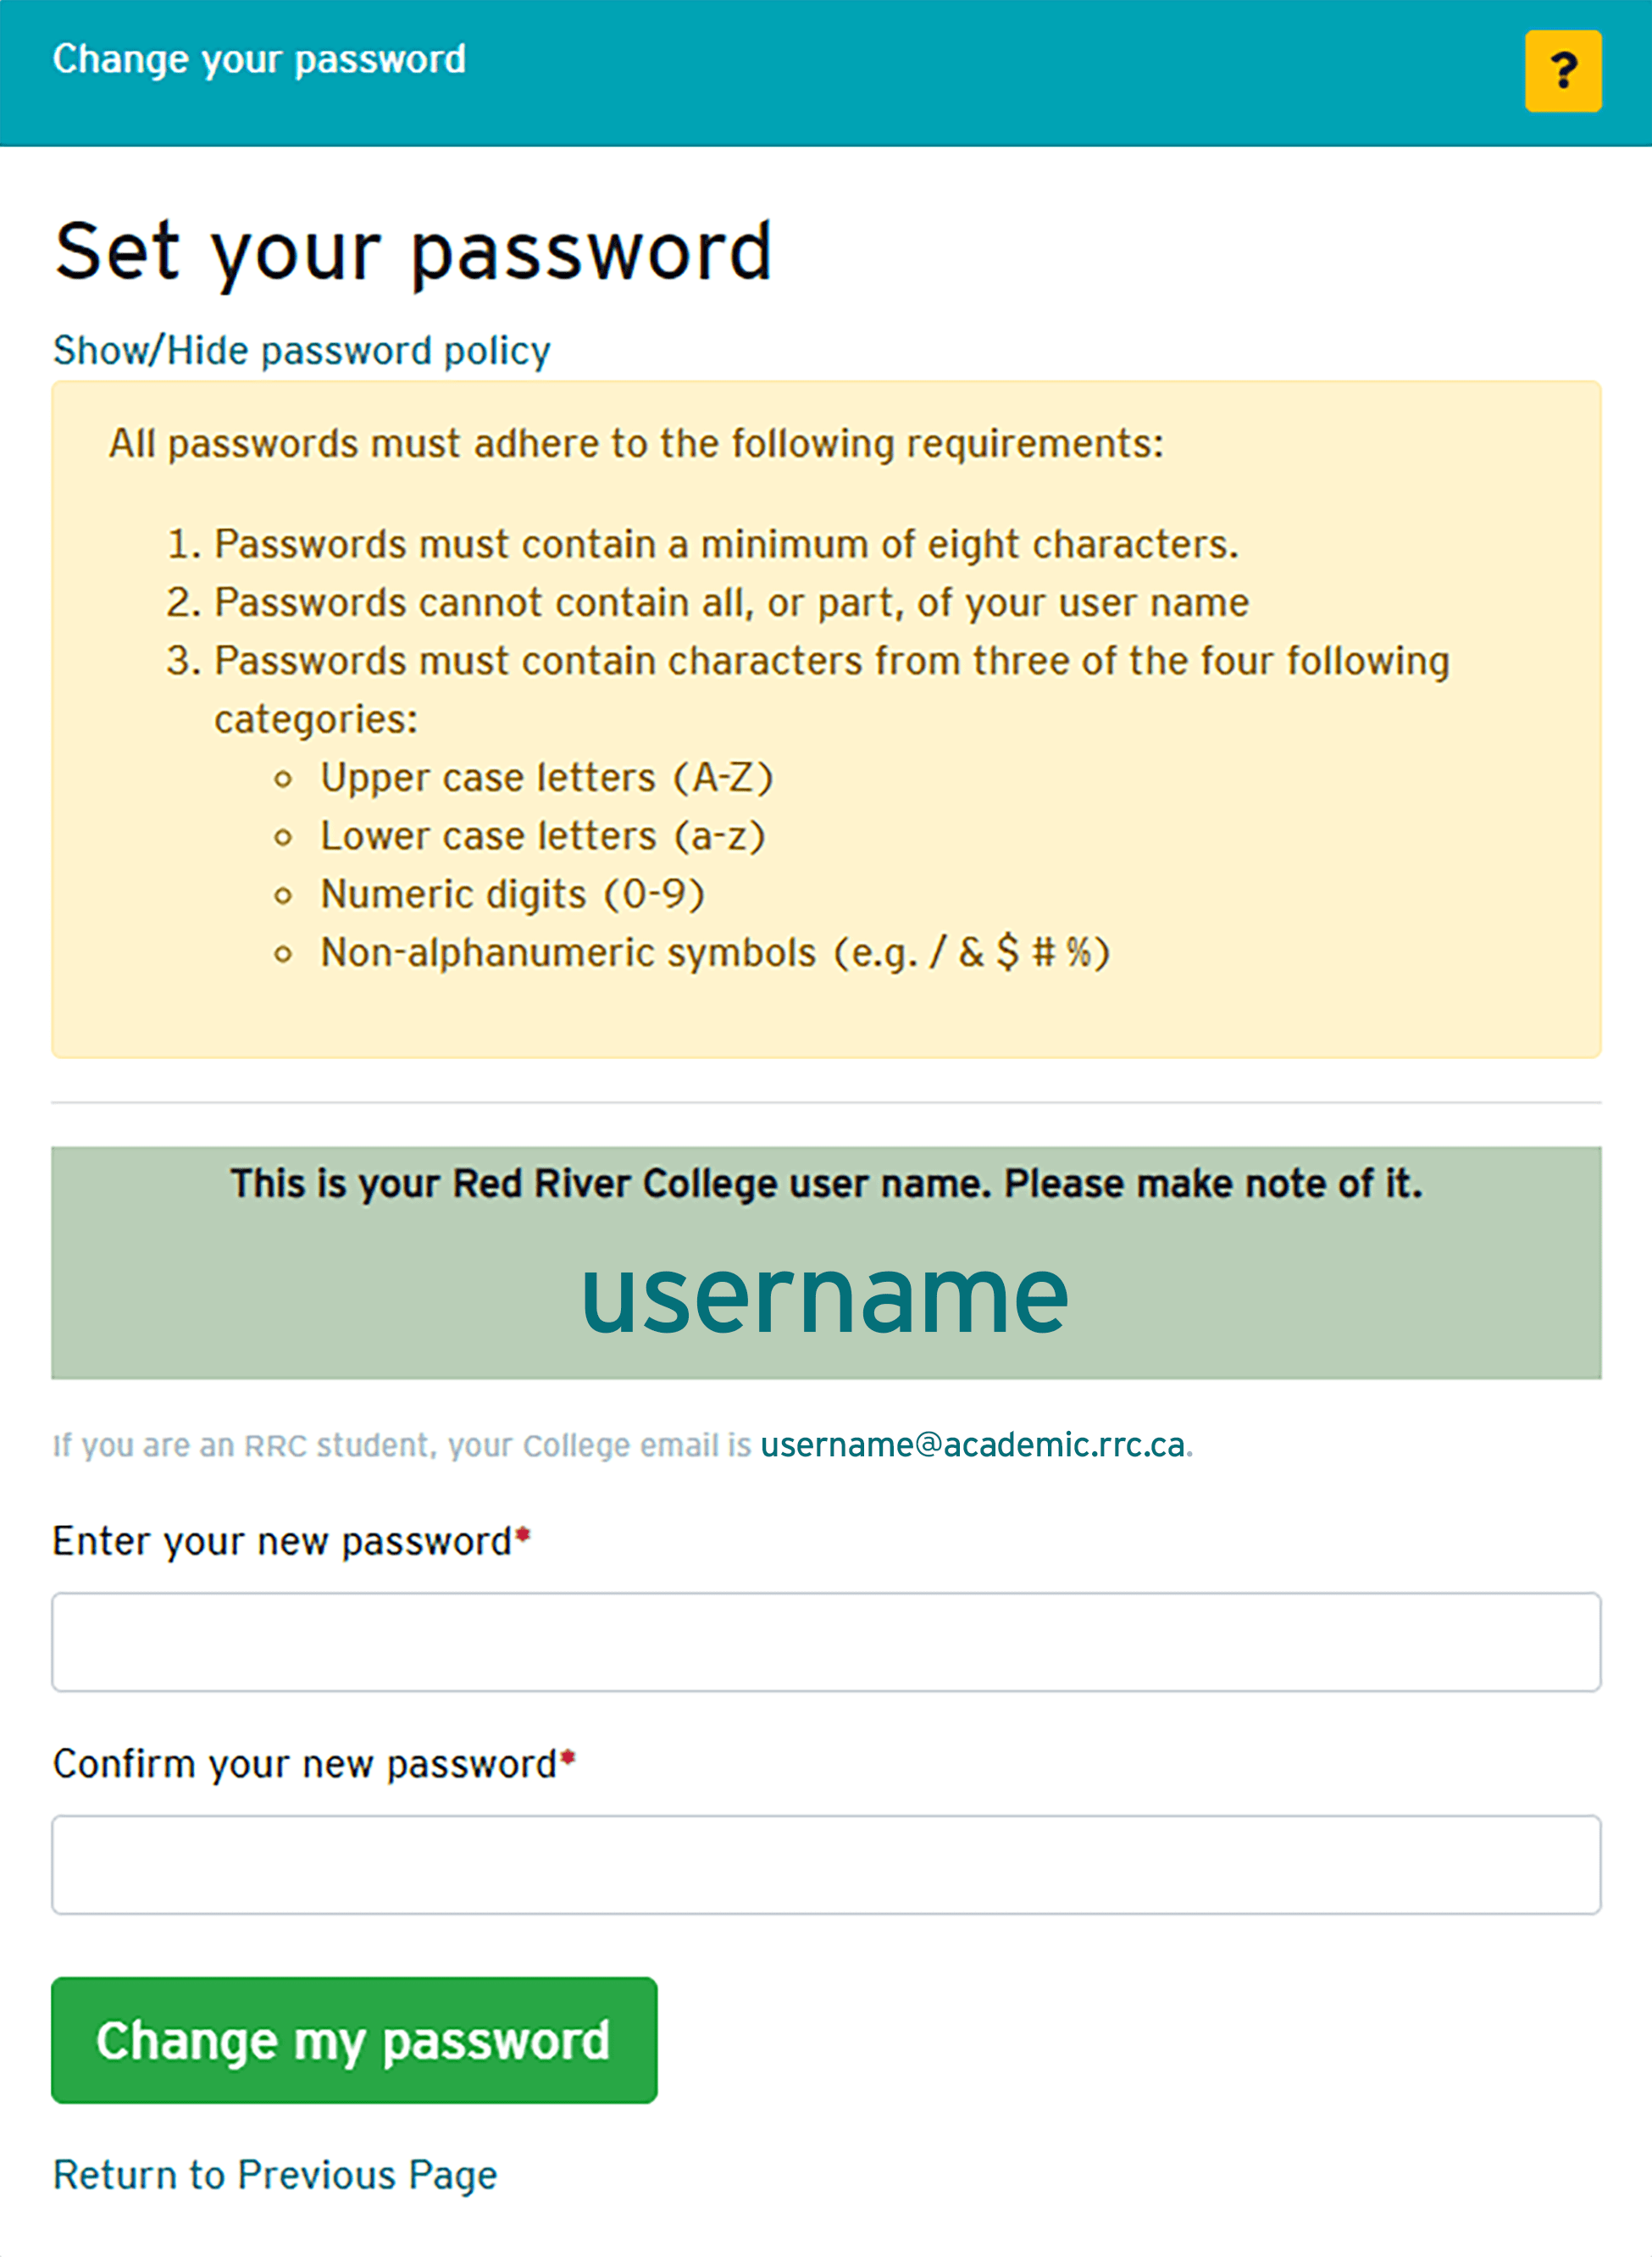 change password policy & user name window